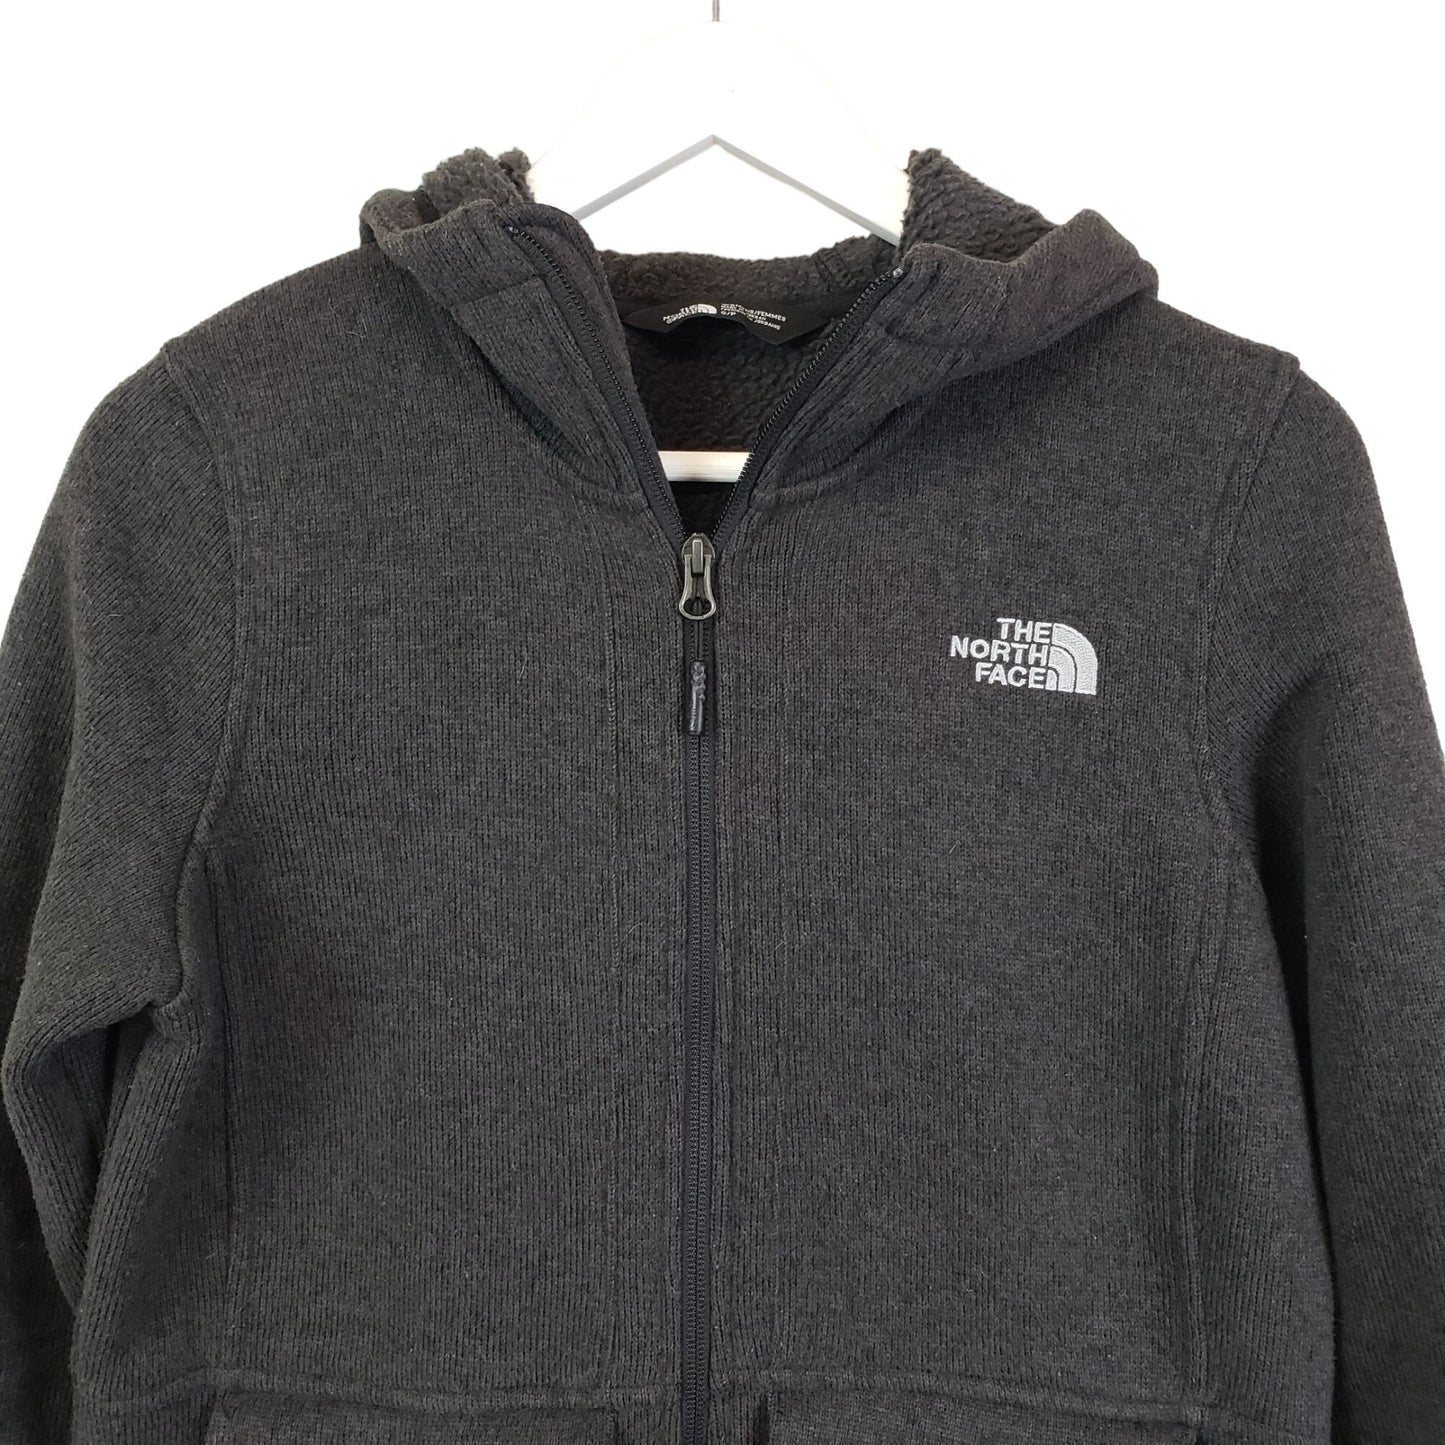 The North Face Crescent Park Fleece Sweater Jacket Size Small